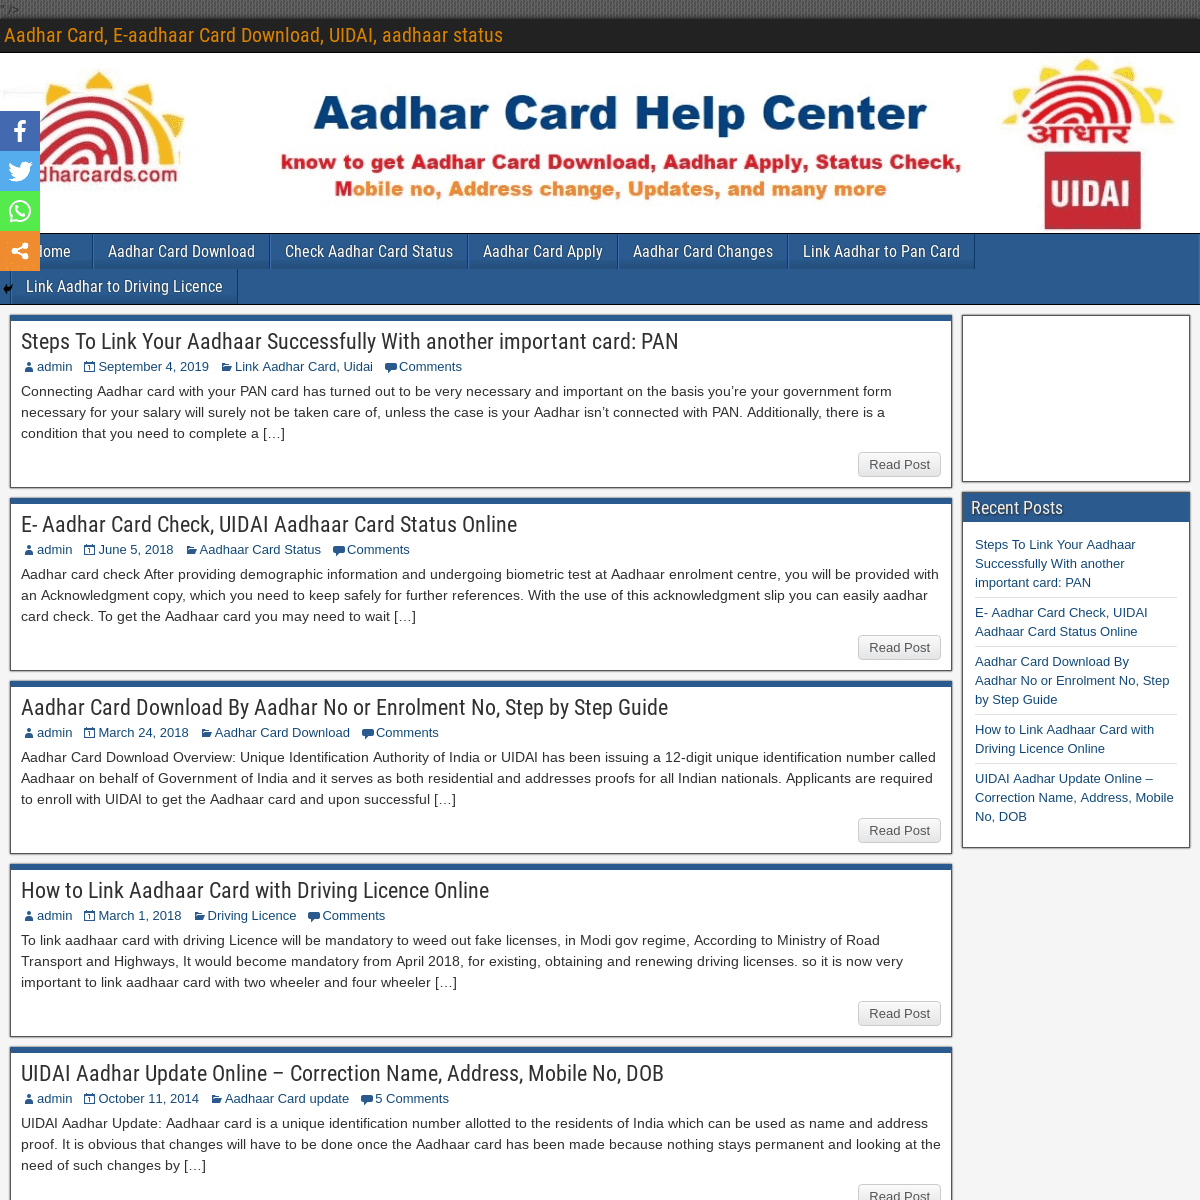 A complete backup of aadharcards.com